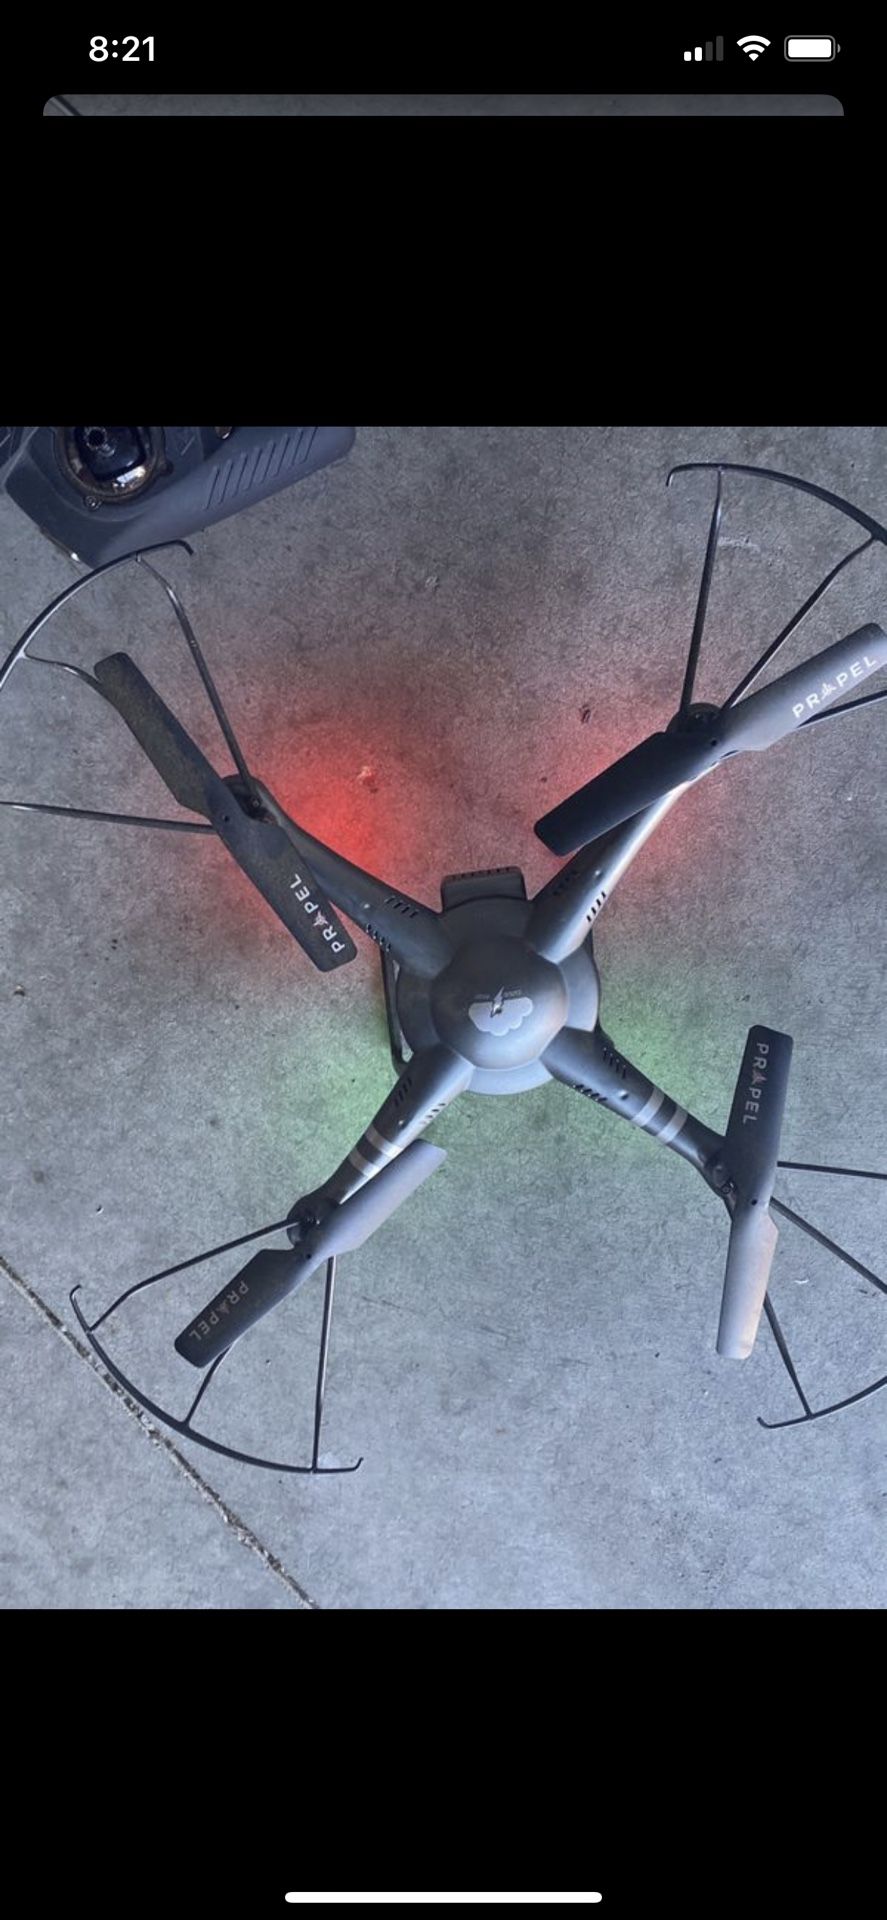 Drone with built in camera